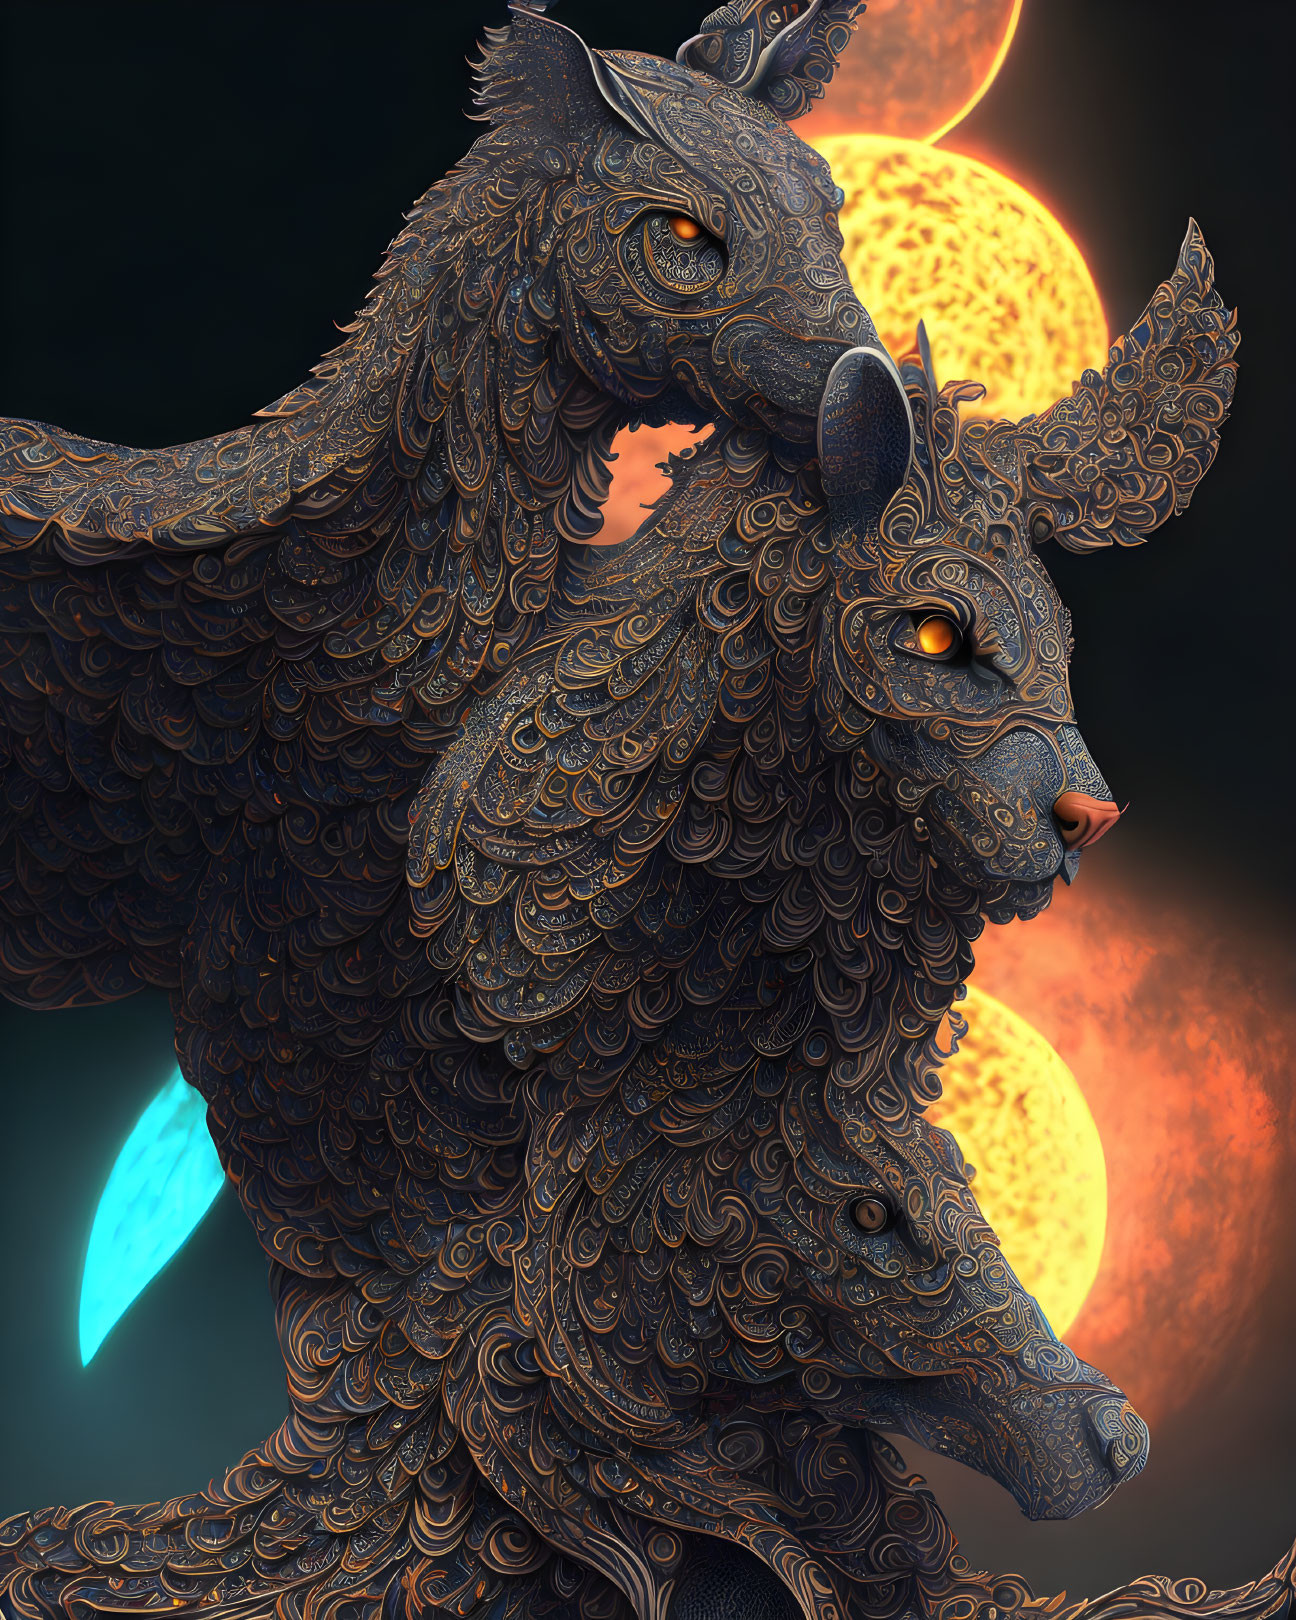 Ornate mythical creatures with glowing eyes in intricate patterns on celestial backdrop